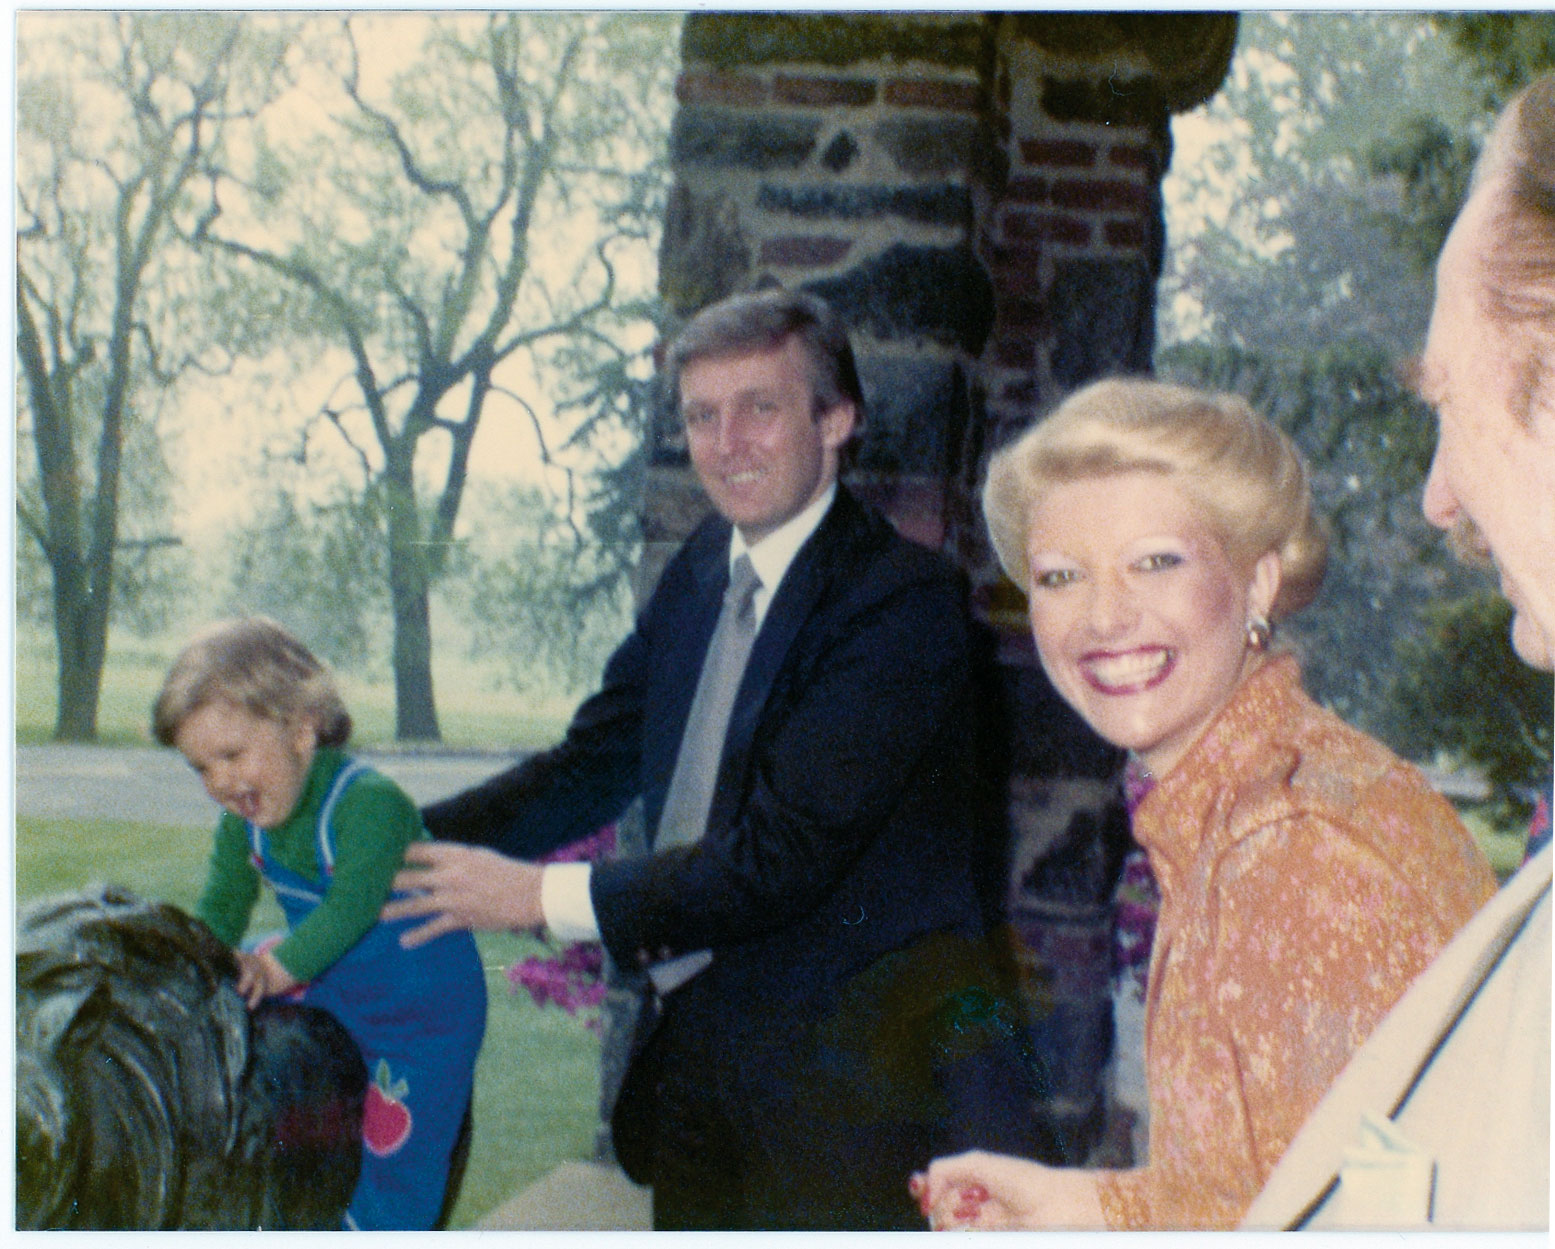 PHOTO: Ivana Trump shares a family photo featuring Don Jr., Donald Trump, herself (from left to right) at the Winged Foot Golf Club in Mamaroneck, New York, in 1978. 